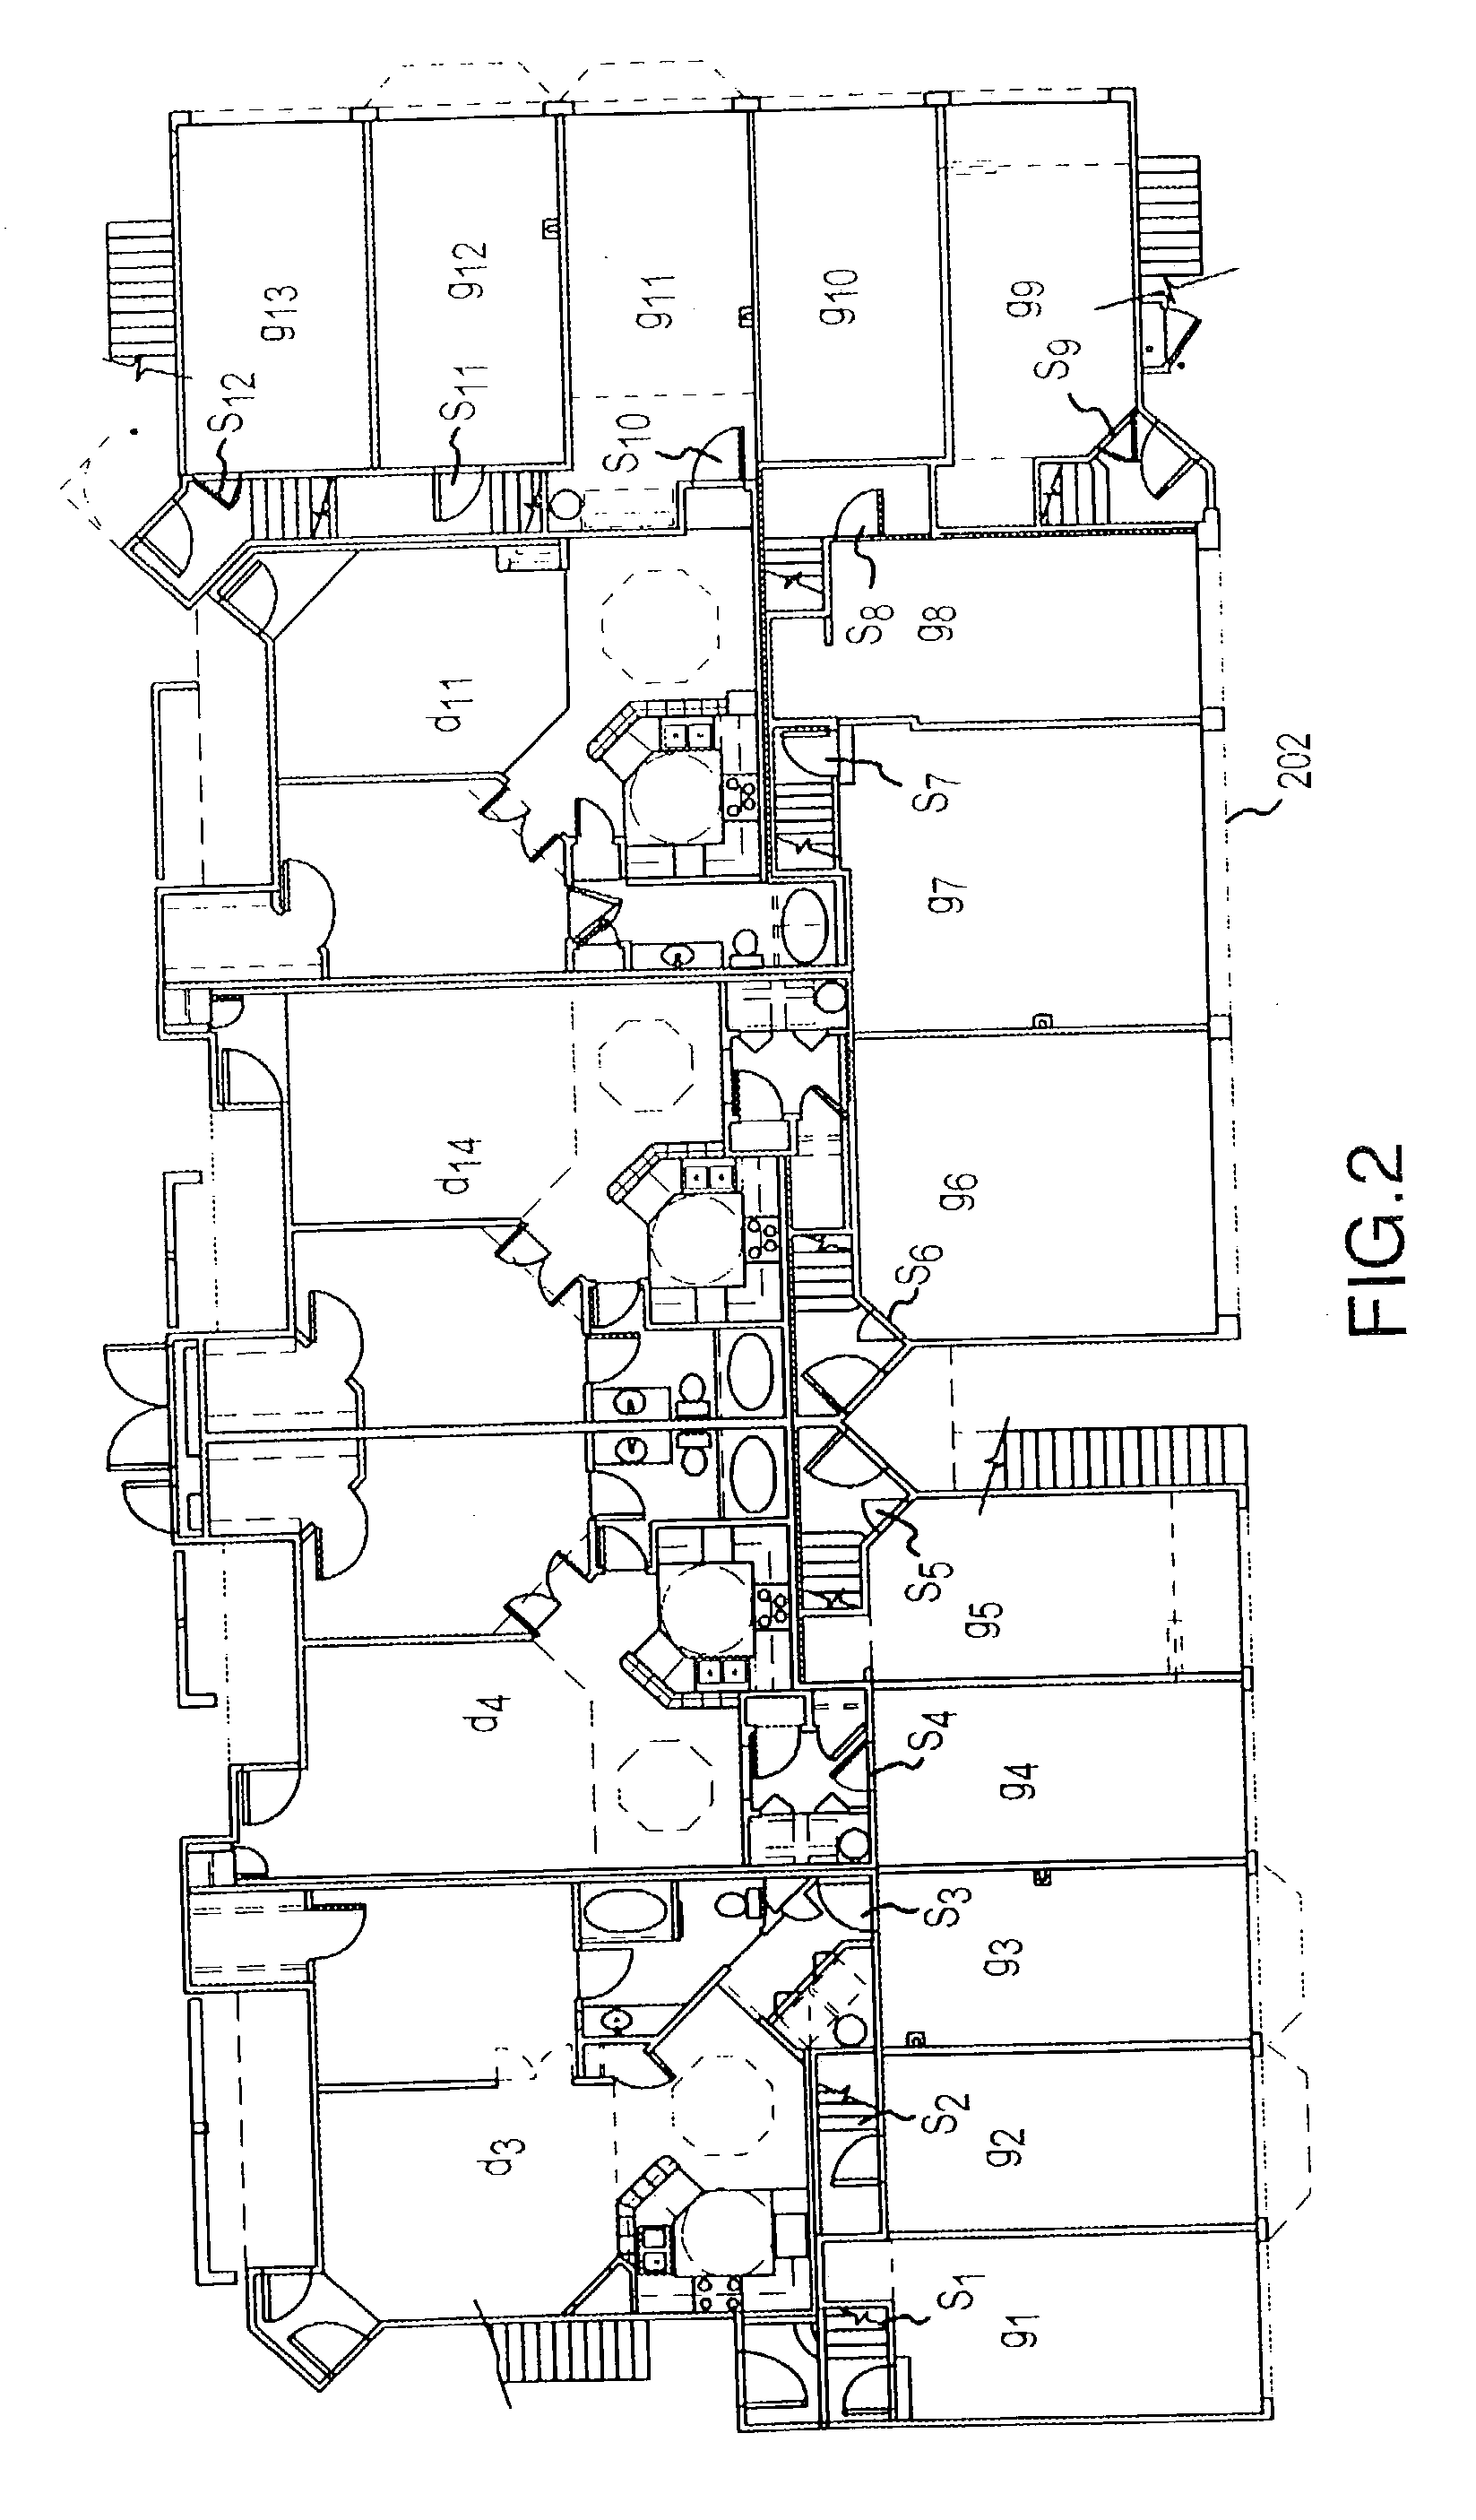 Methods and apparatus for a multi-story dwelling with attached garages